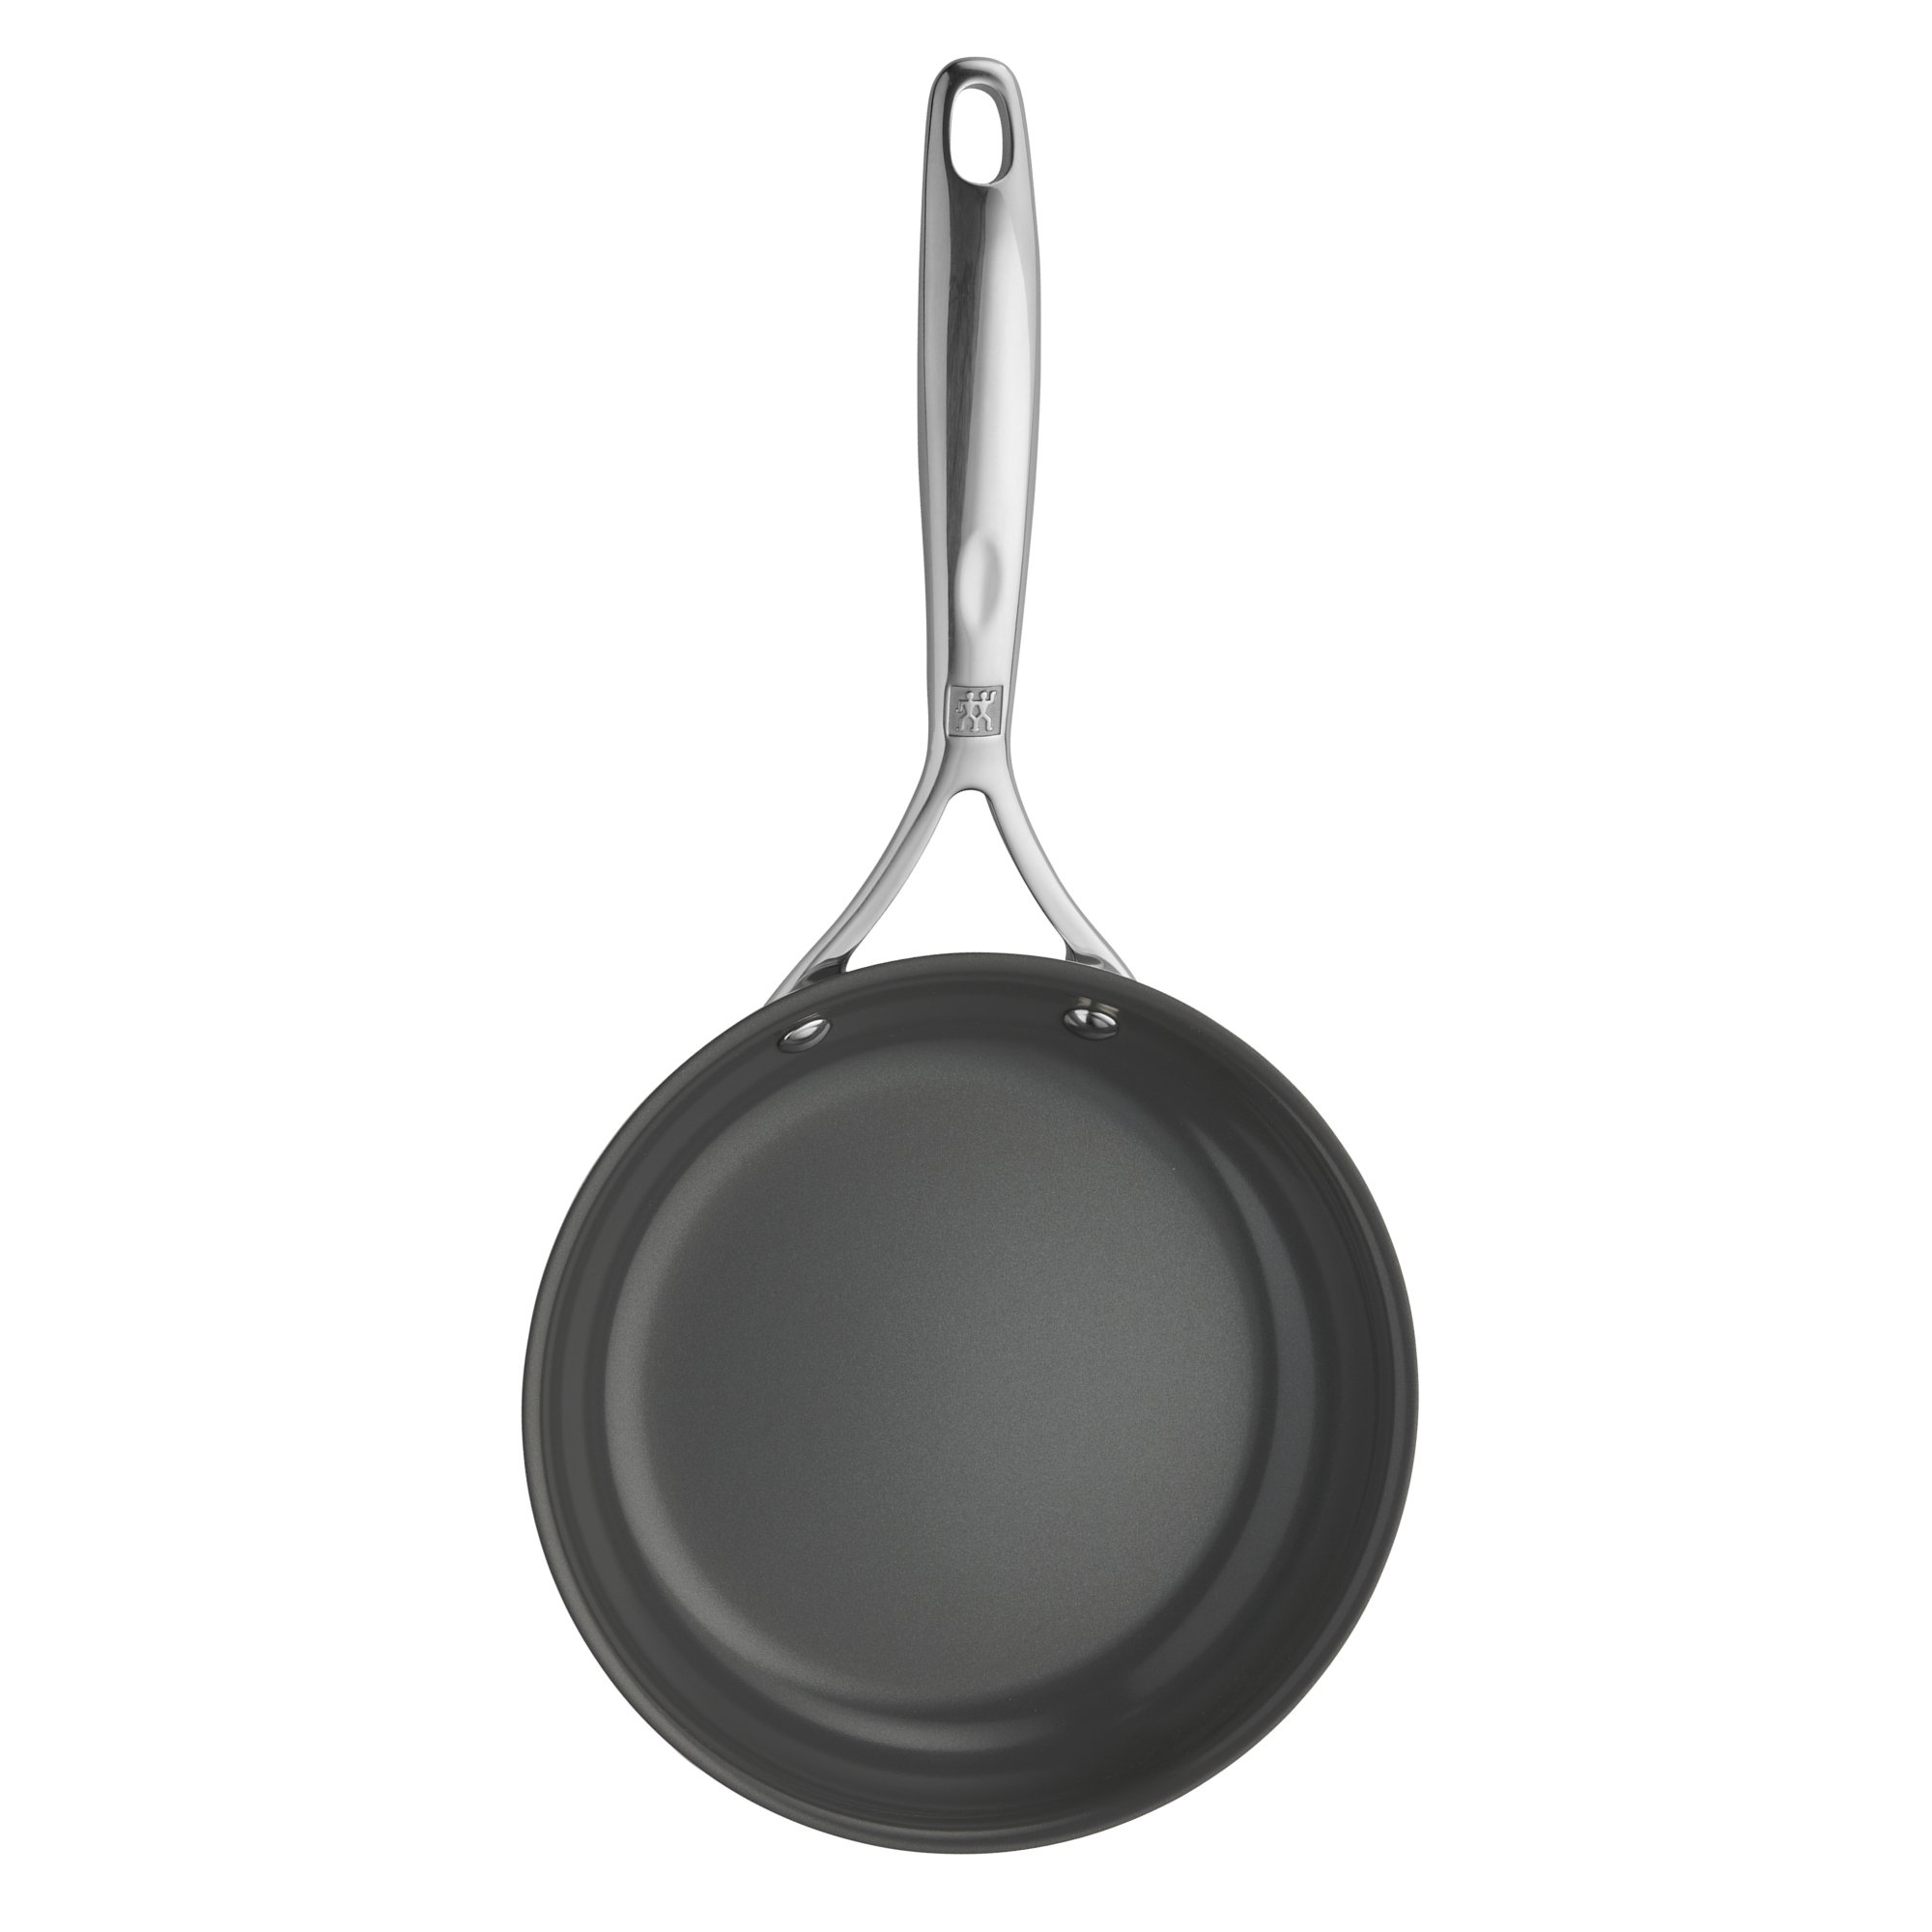 Zwilling ZWILLING Energy Plus 8-inch Stainless Steel Ceramic